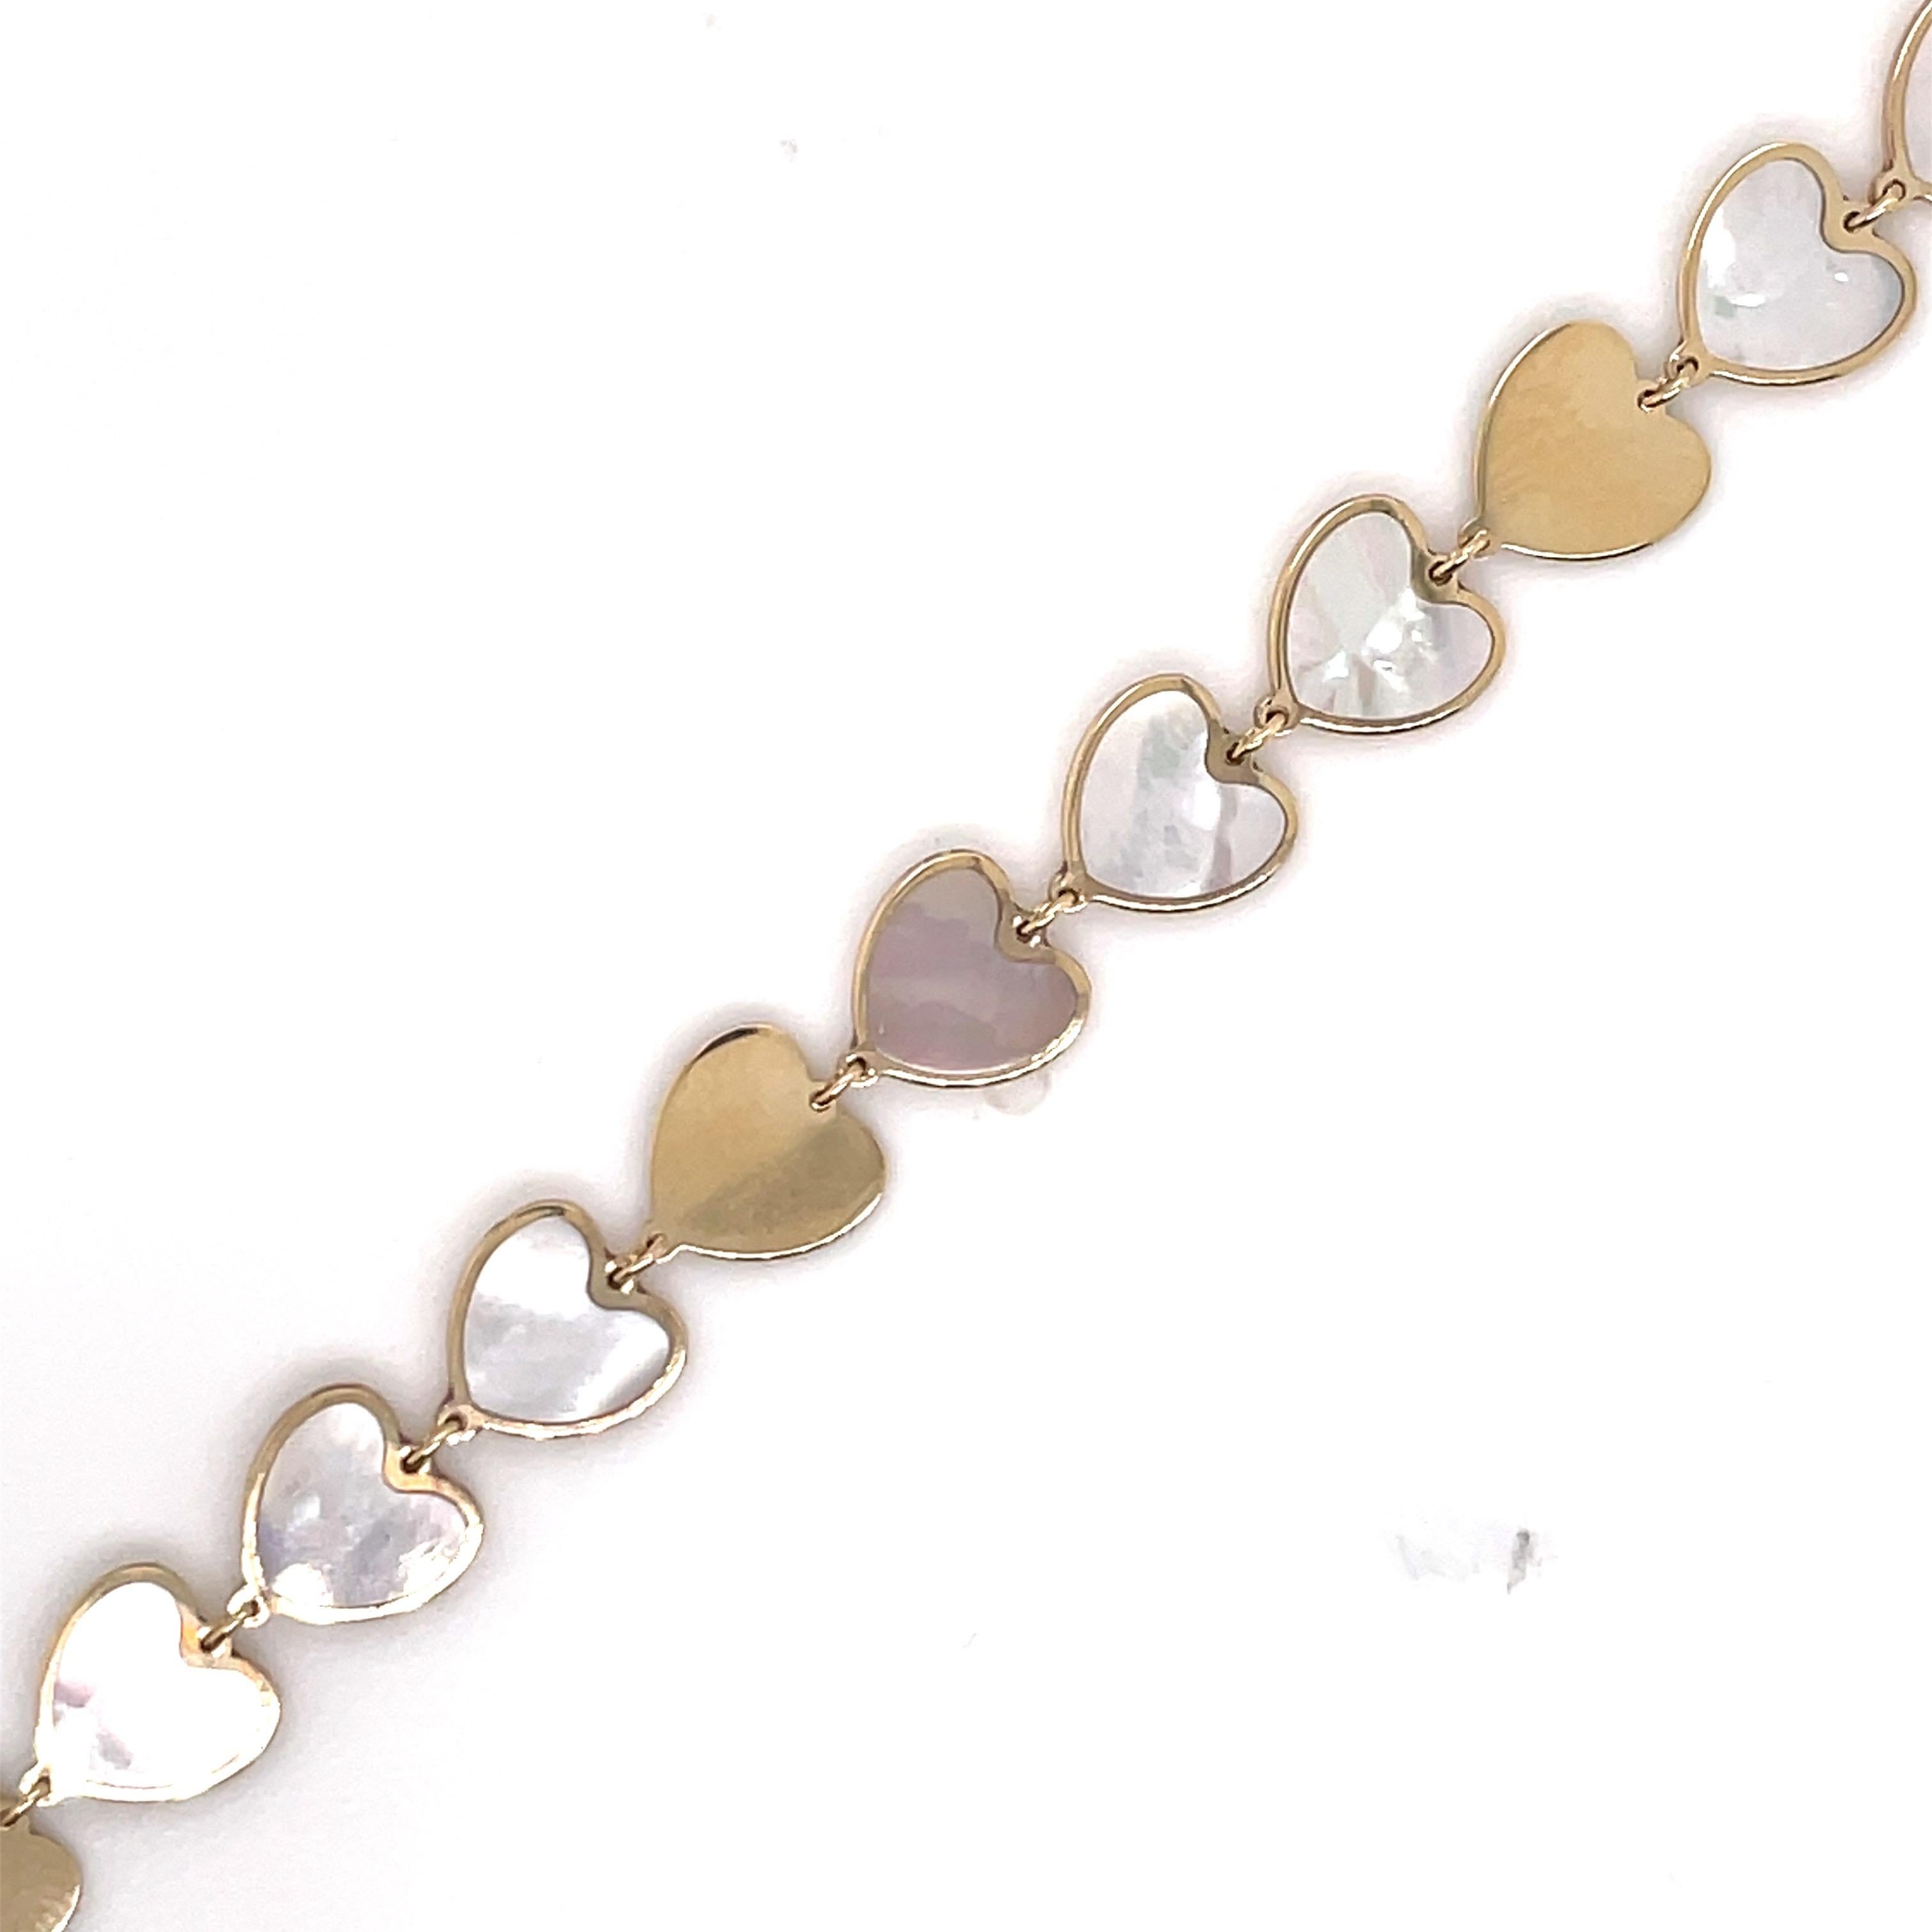 Italian 14k yellow gold heart mother of pearl and solid gold bracelet. 
Super fun and trendy! 
Available in different colors and styles. 